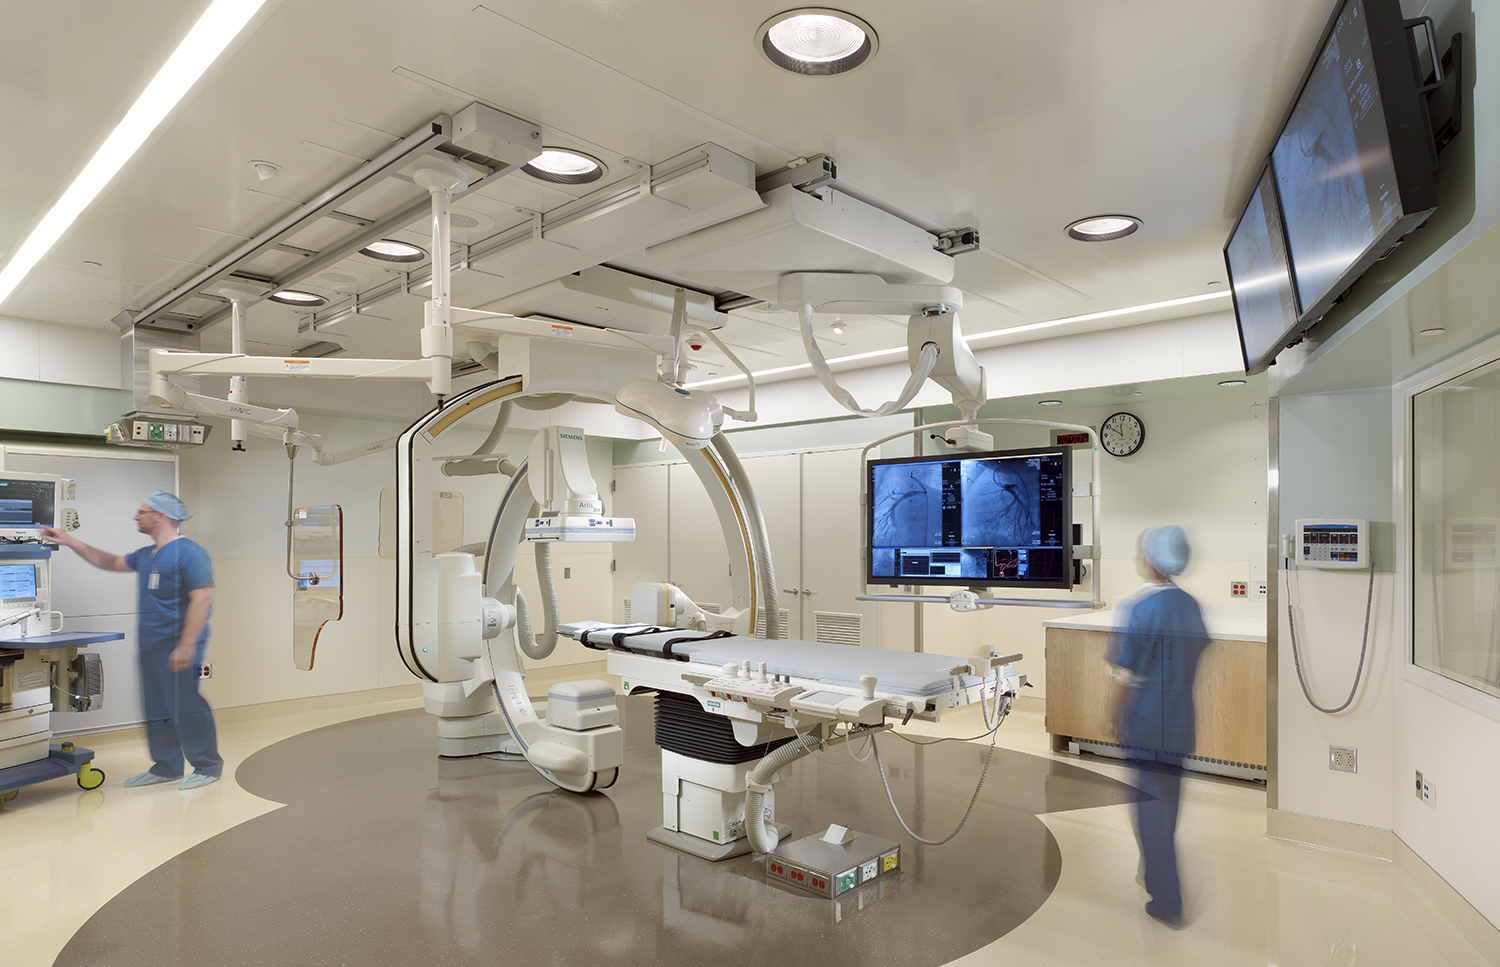 New biplane imaging systems used for cardiac catheterization, angiography, and neurosurgery are incorporated.